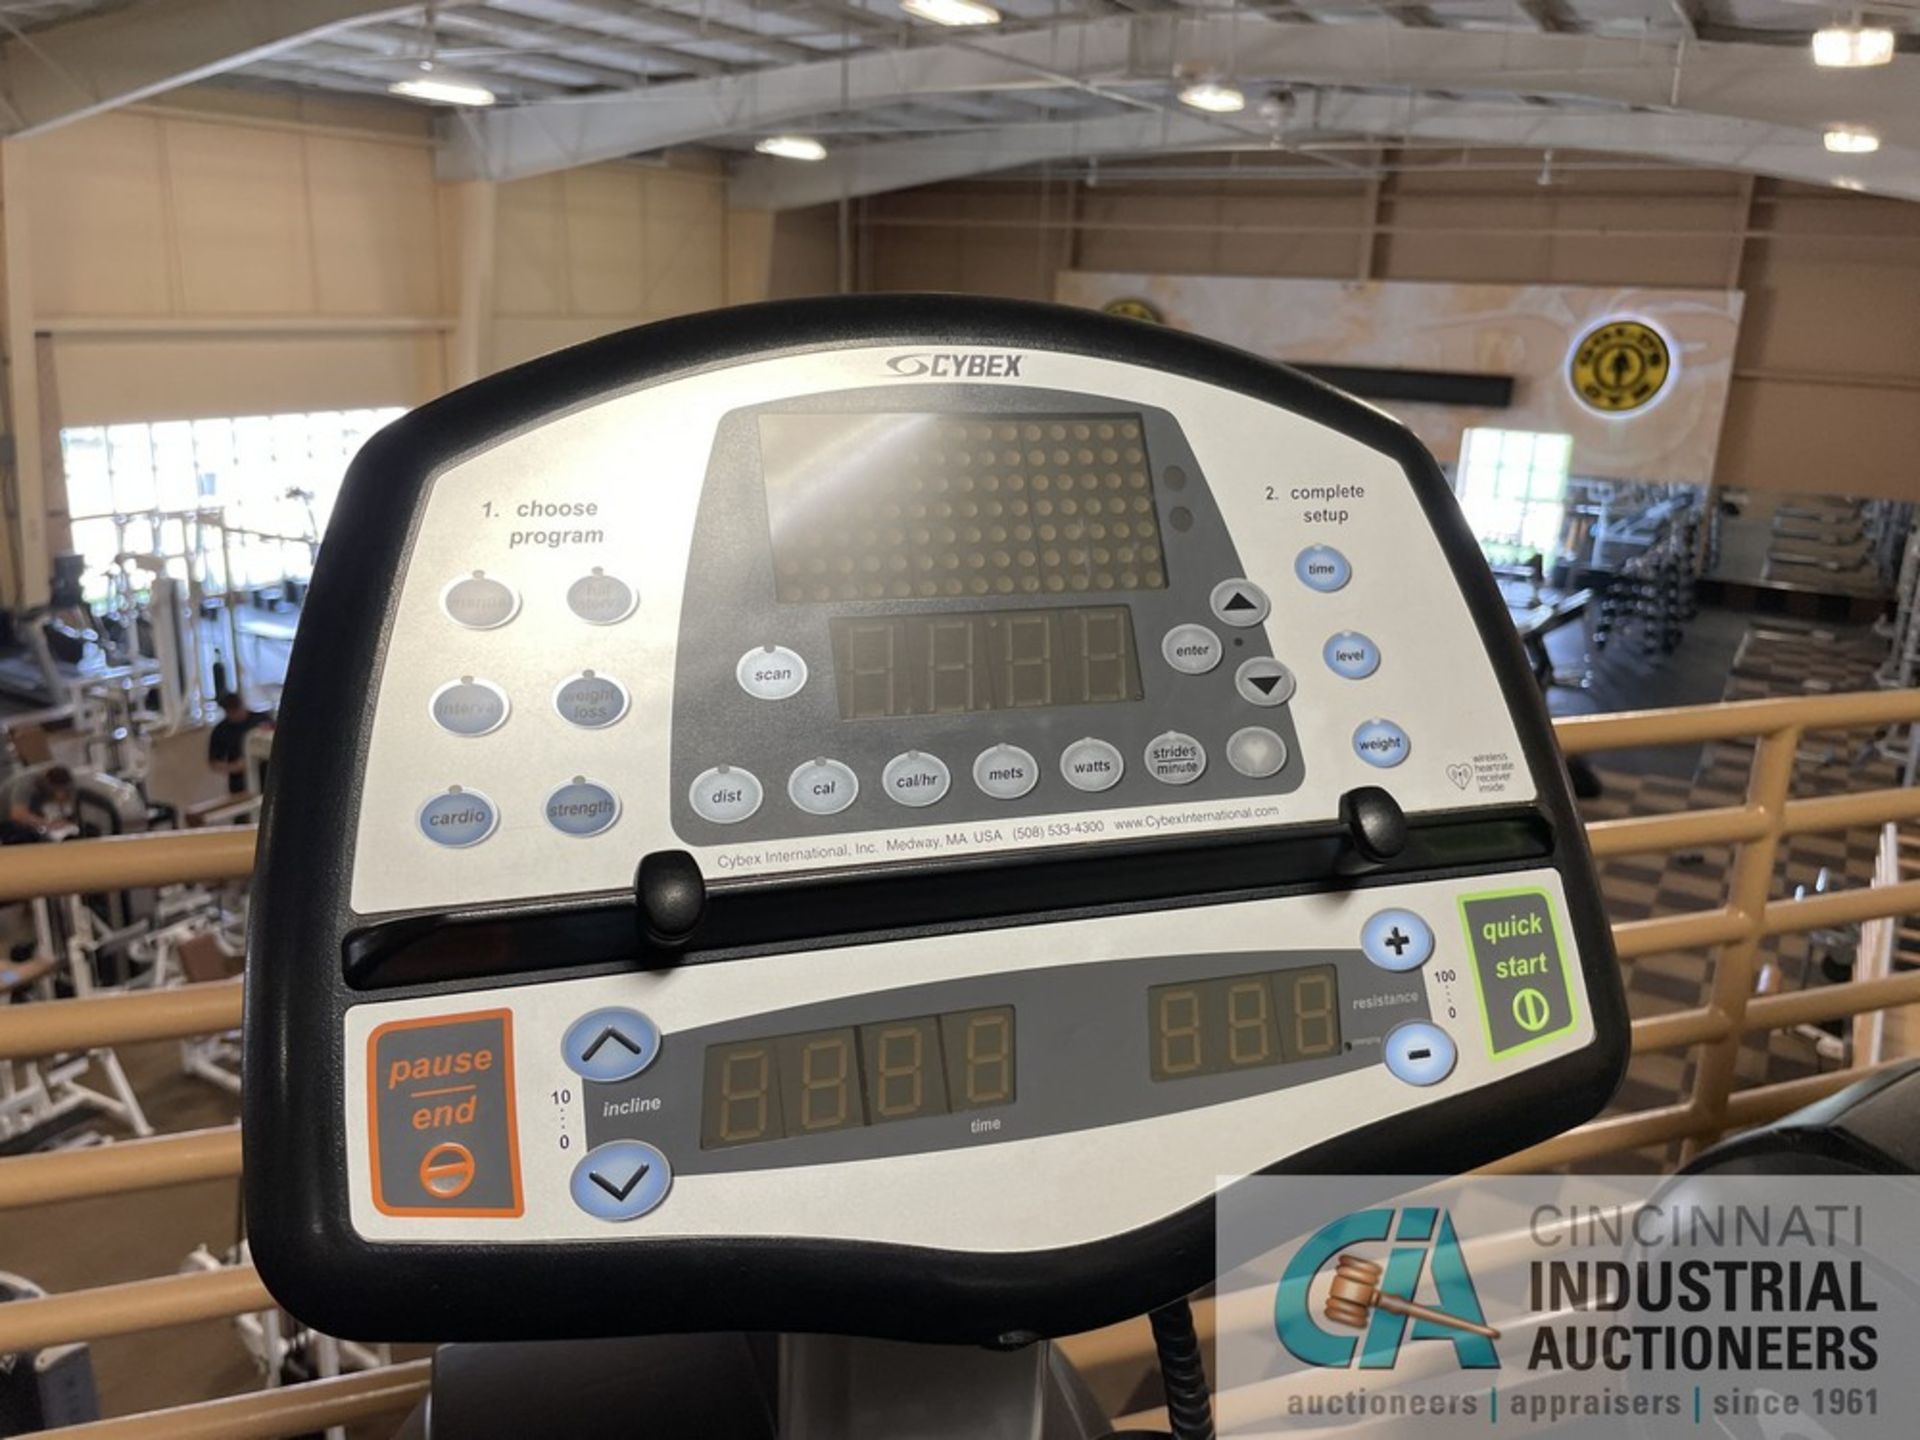 CYBEX TOTAL BODY ARC TRAINER ELLIPTICAL **ATTN: This lot is located on the second floor. Removal - Image 2 of 7